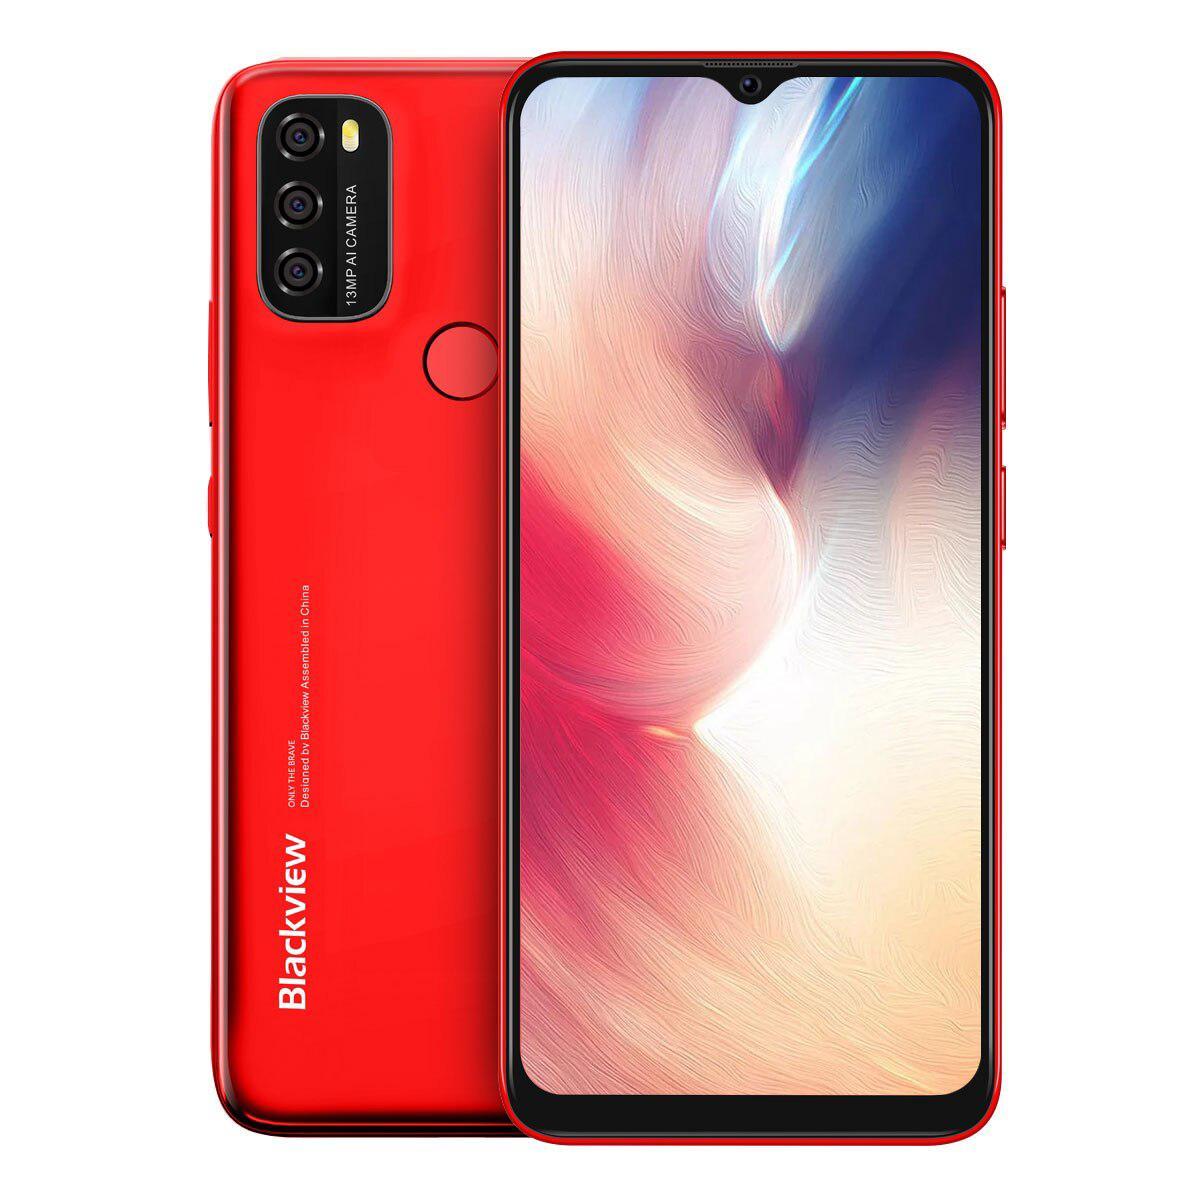 Blackview A70 Pro 4/32Gb red